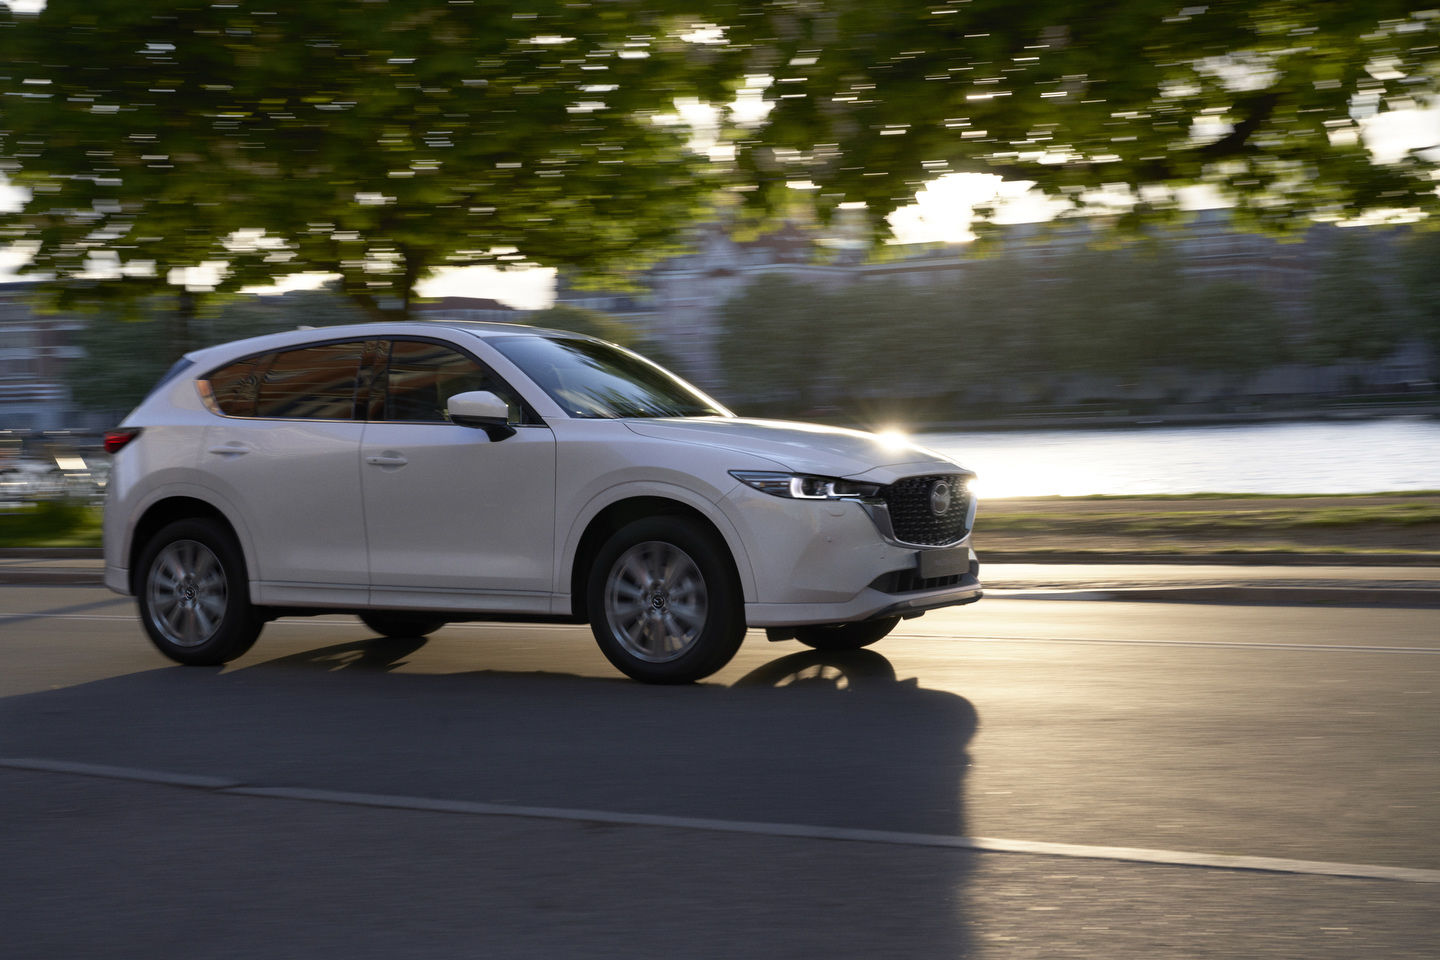 The 2022 Mazda CX-5 gets even better with new standard i-ACTIV all-wheel drive